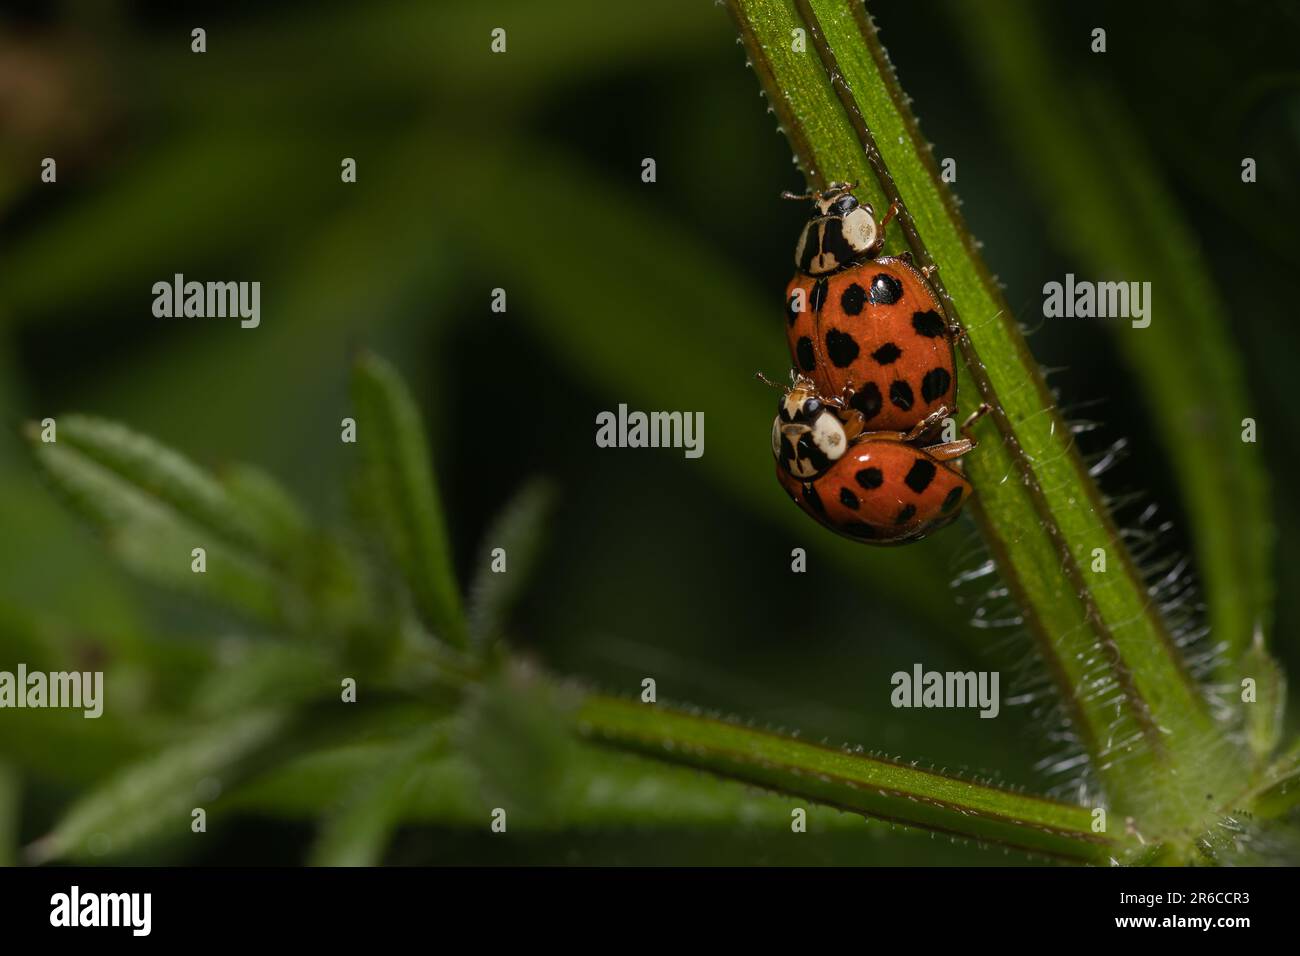 A pair of Asian lady beetles mating. Stock Photo